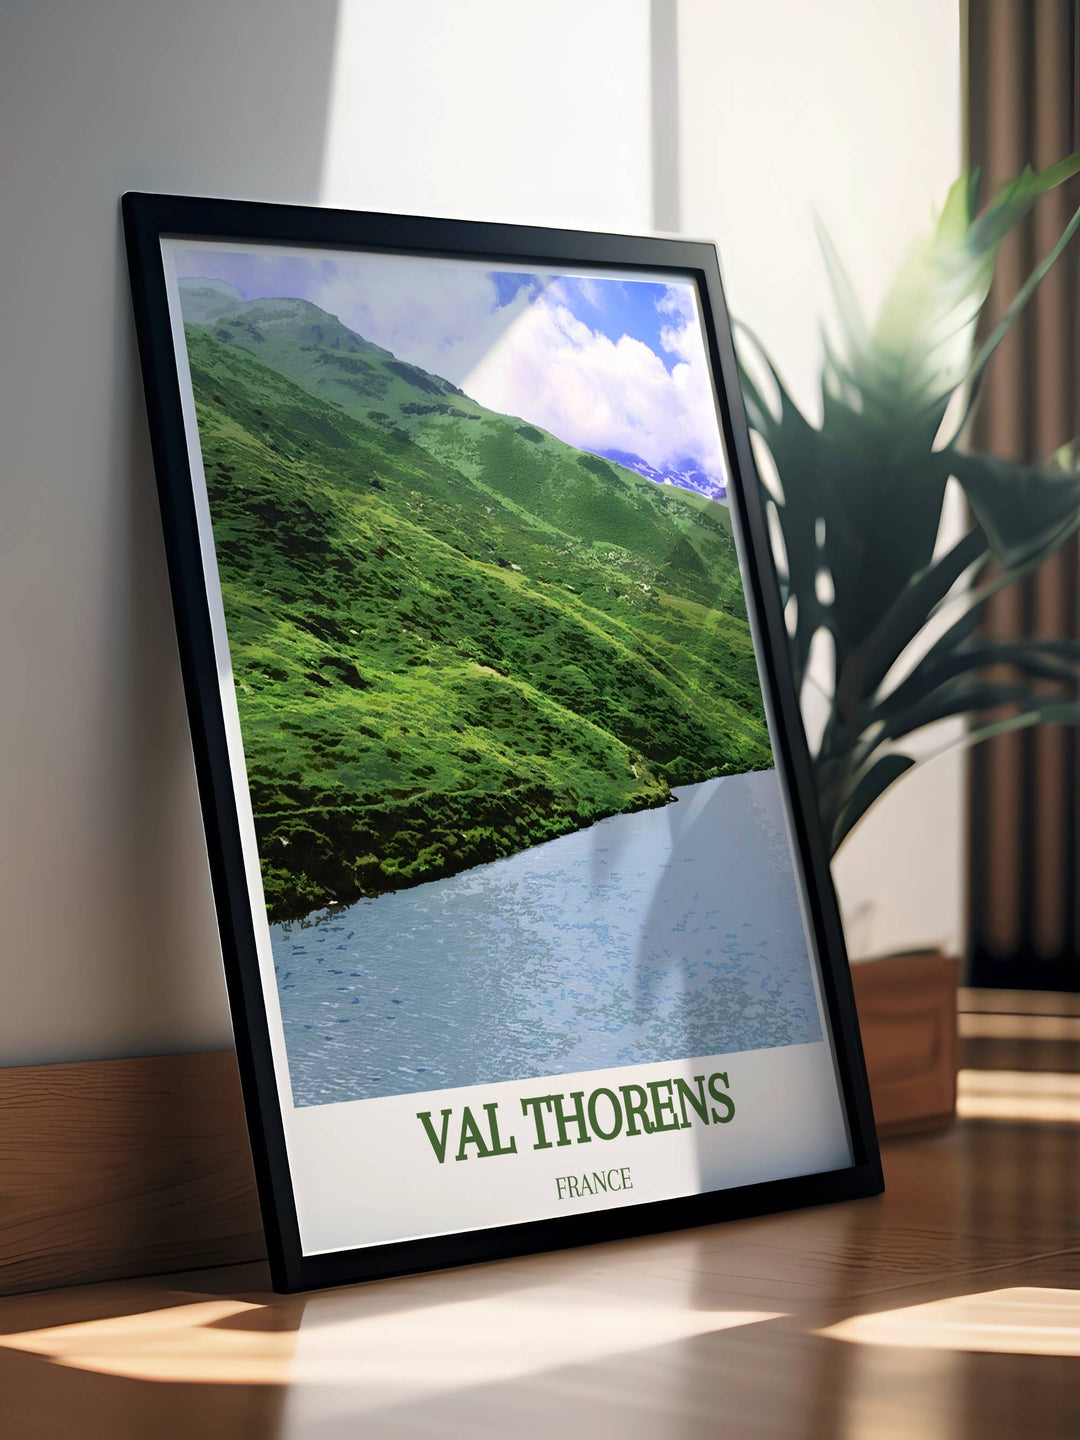 Canvas art of Val Thorens showcasing the tranquil lake of Lac du Lou, ideal for adding a touch of alpine serenity to any room. Perfect for lovers of mountain scenery.